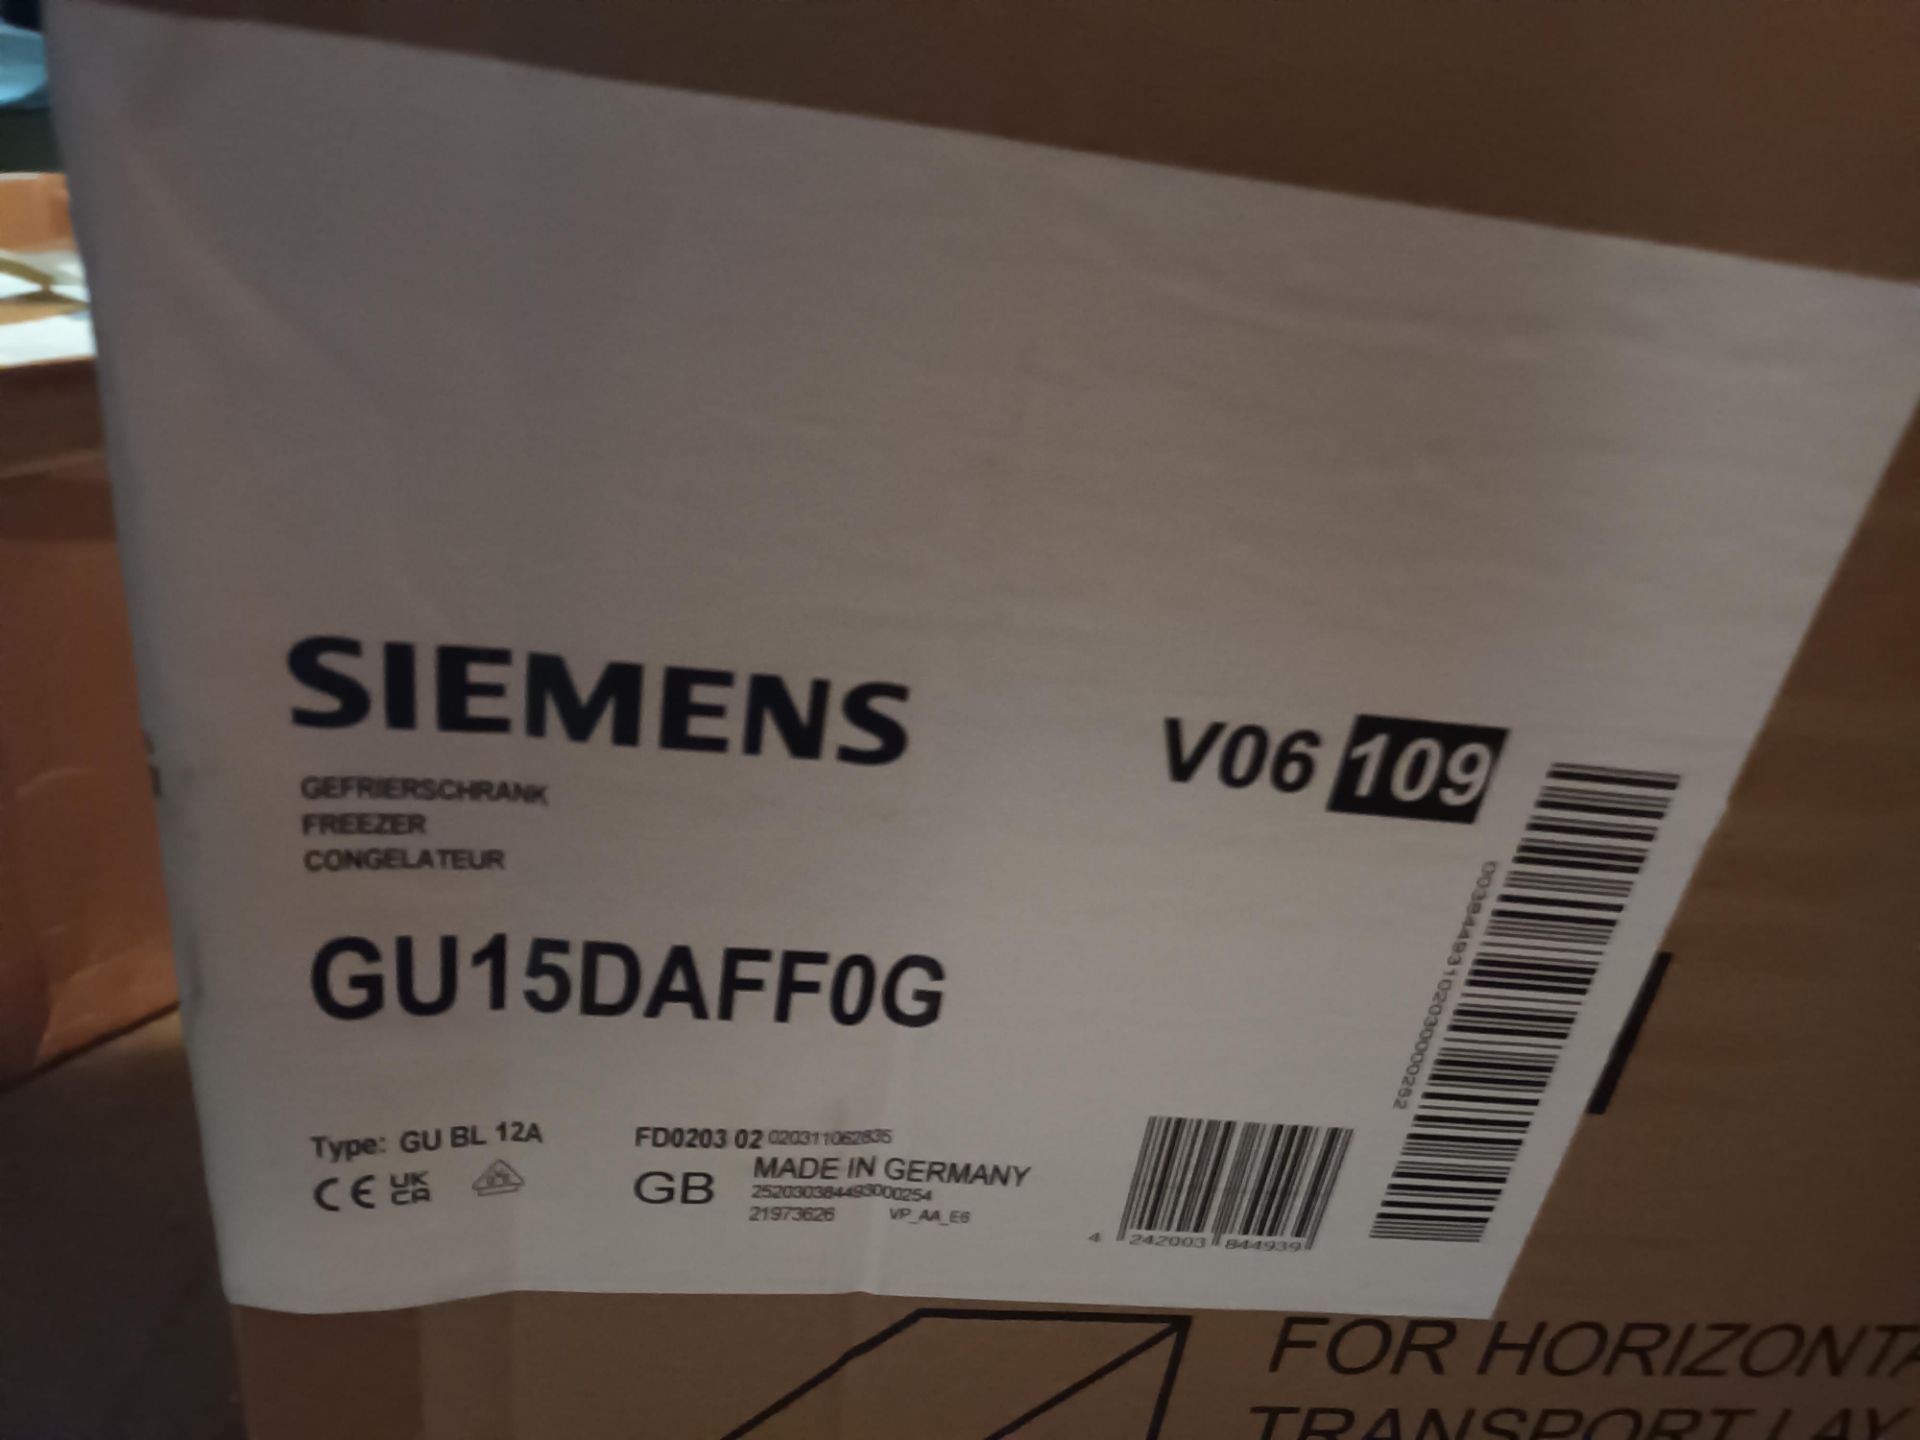 Siemens GU15DAFF0G built-in undercounter freezer (boxed & sealed) (Located: Billericay) - Image 2 of 2